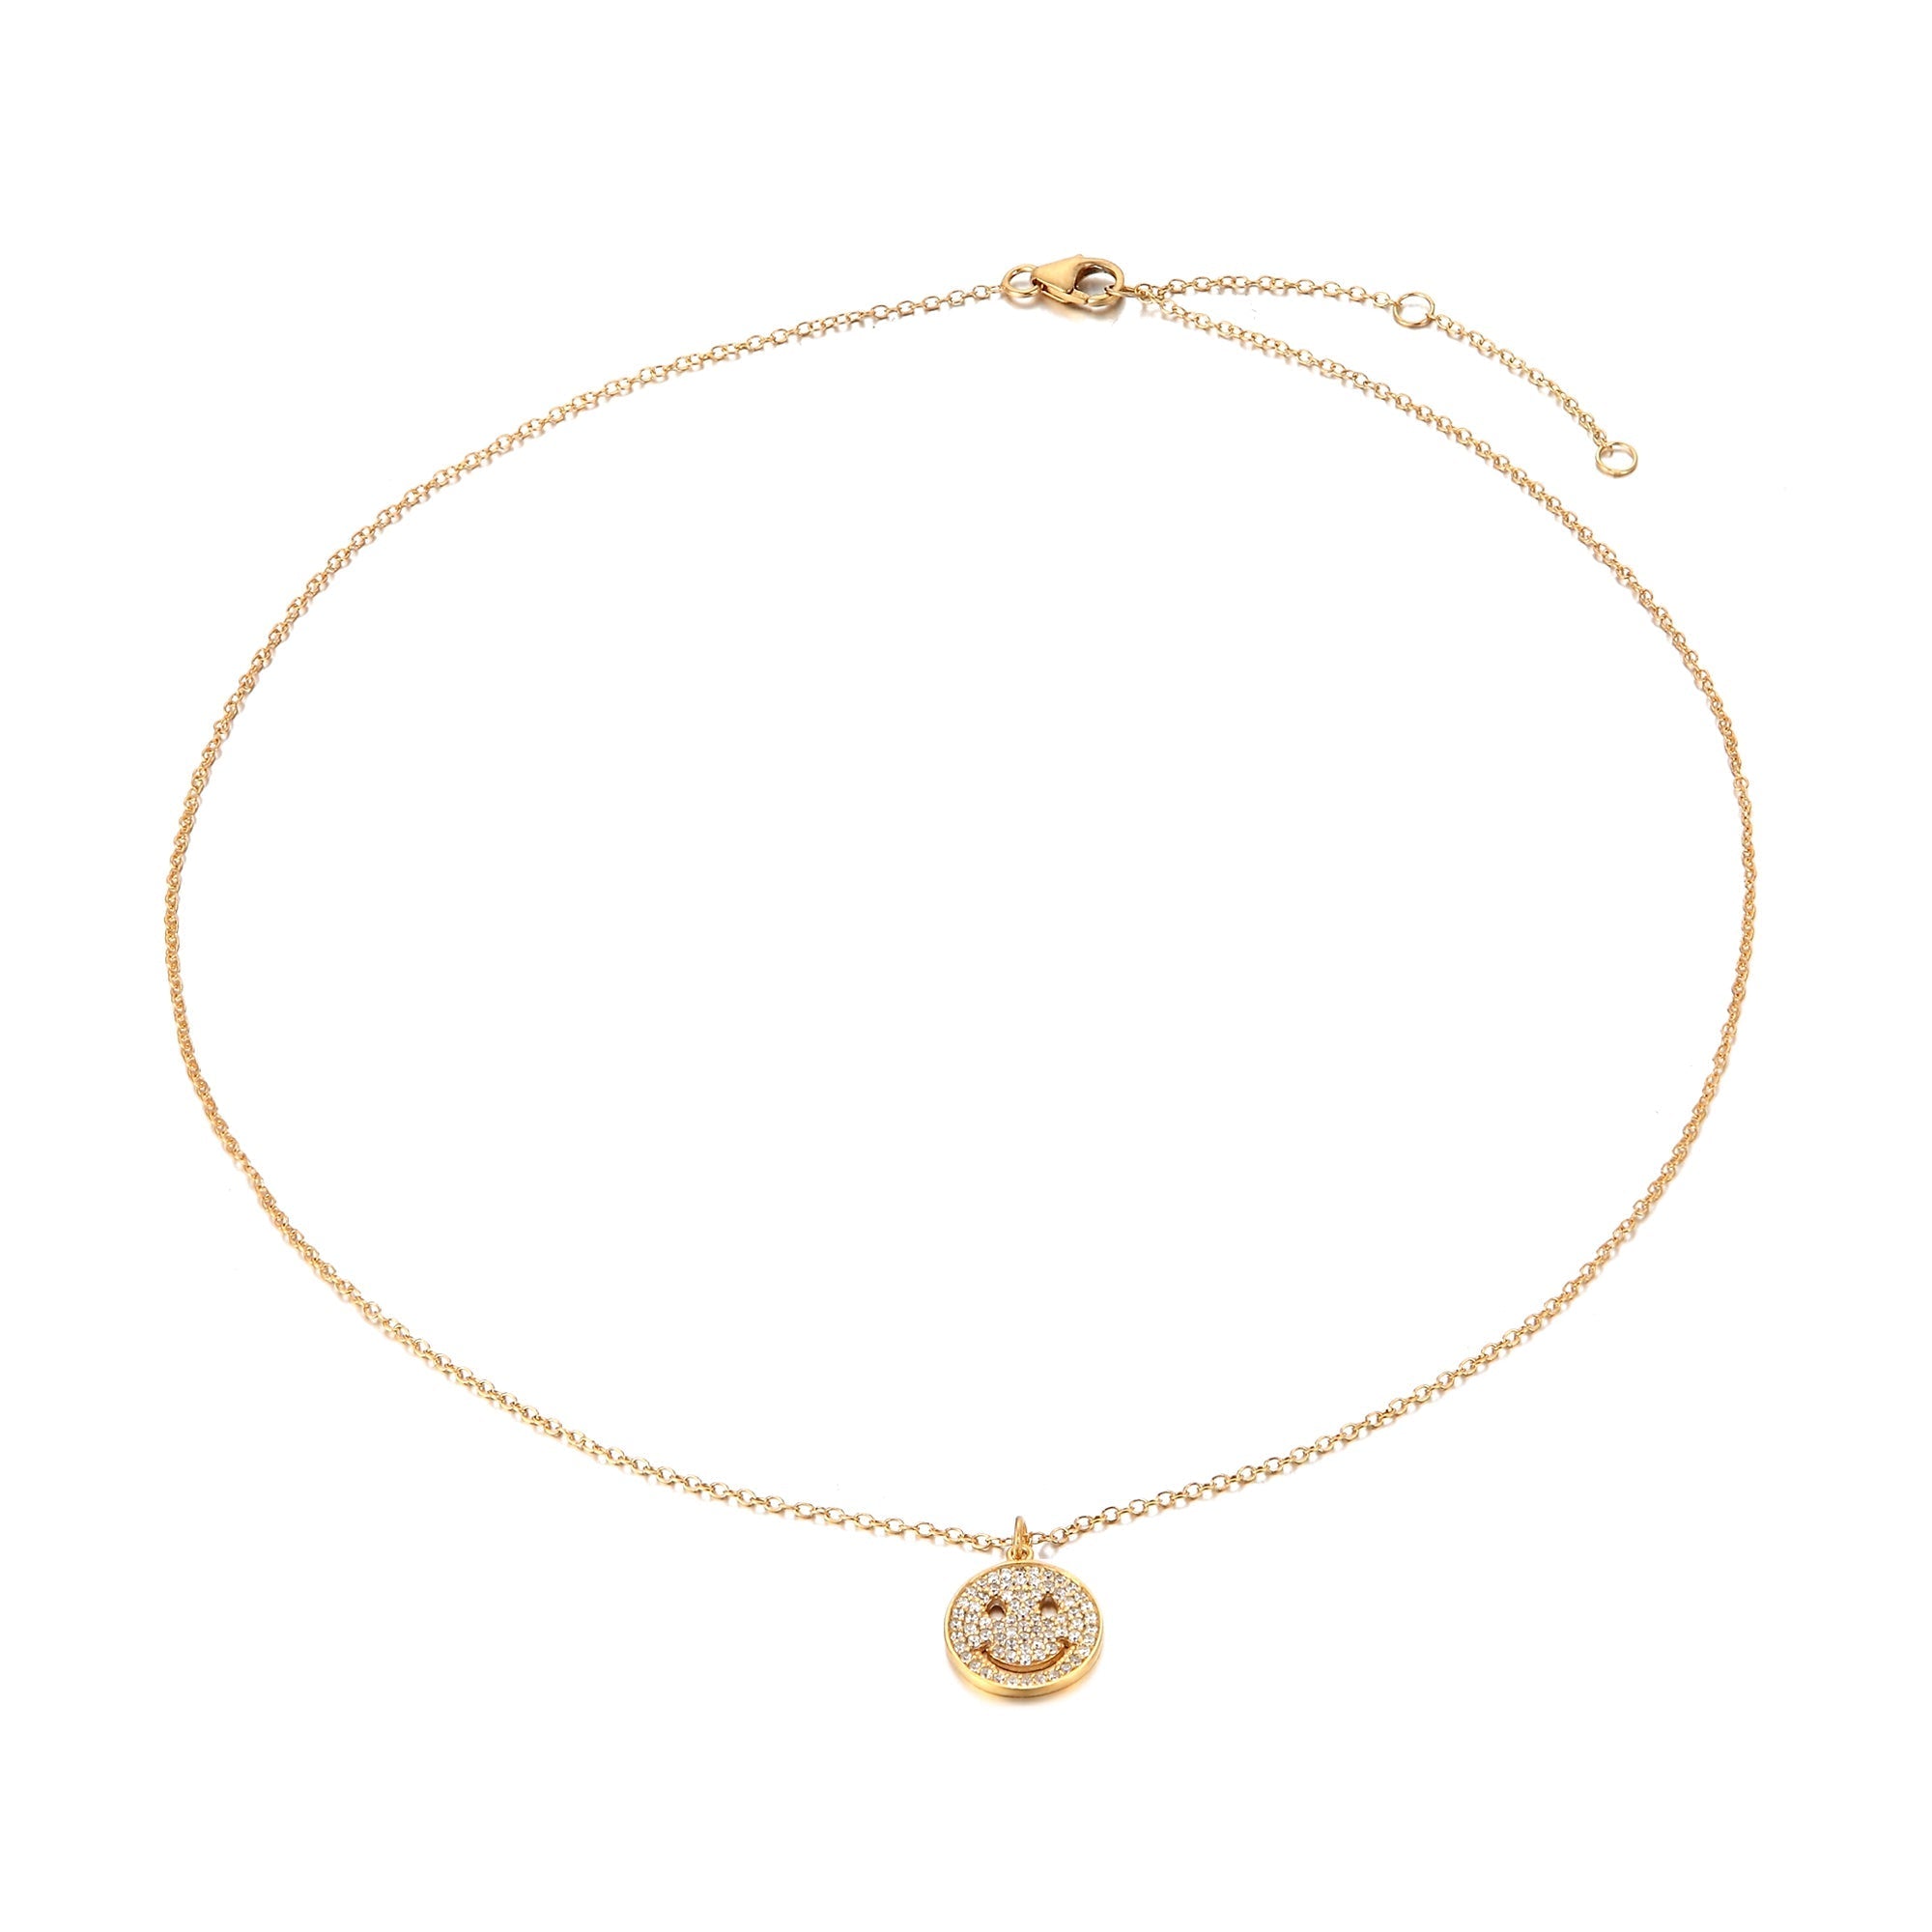 Gold Necklace - seol-gold